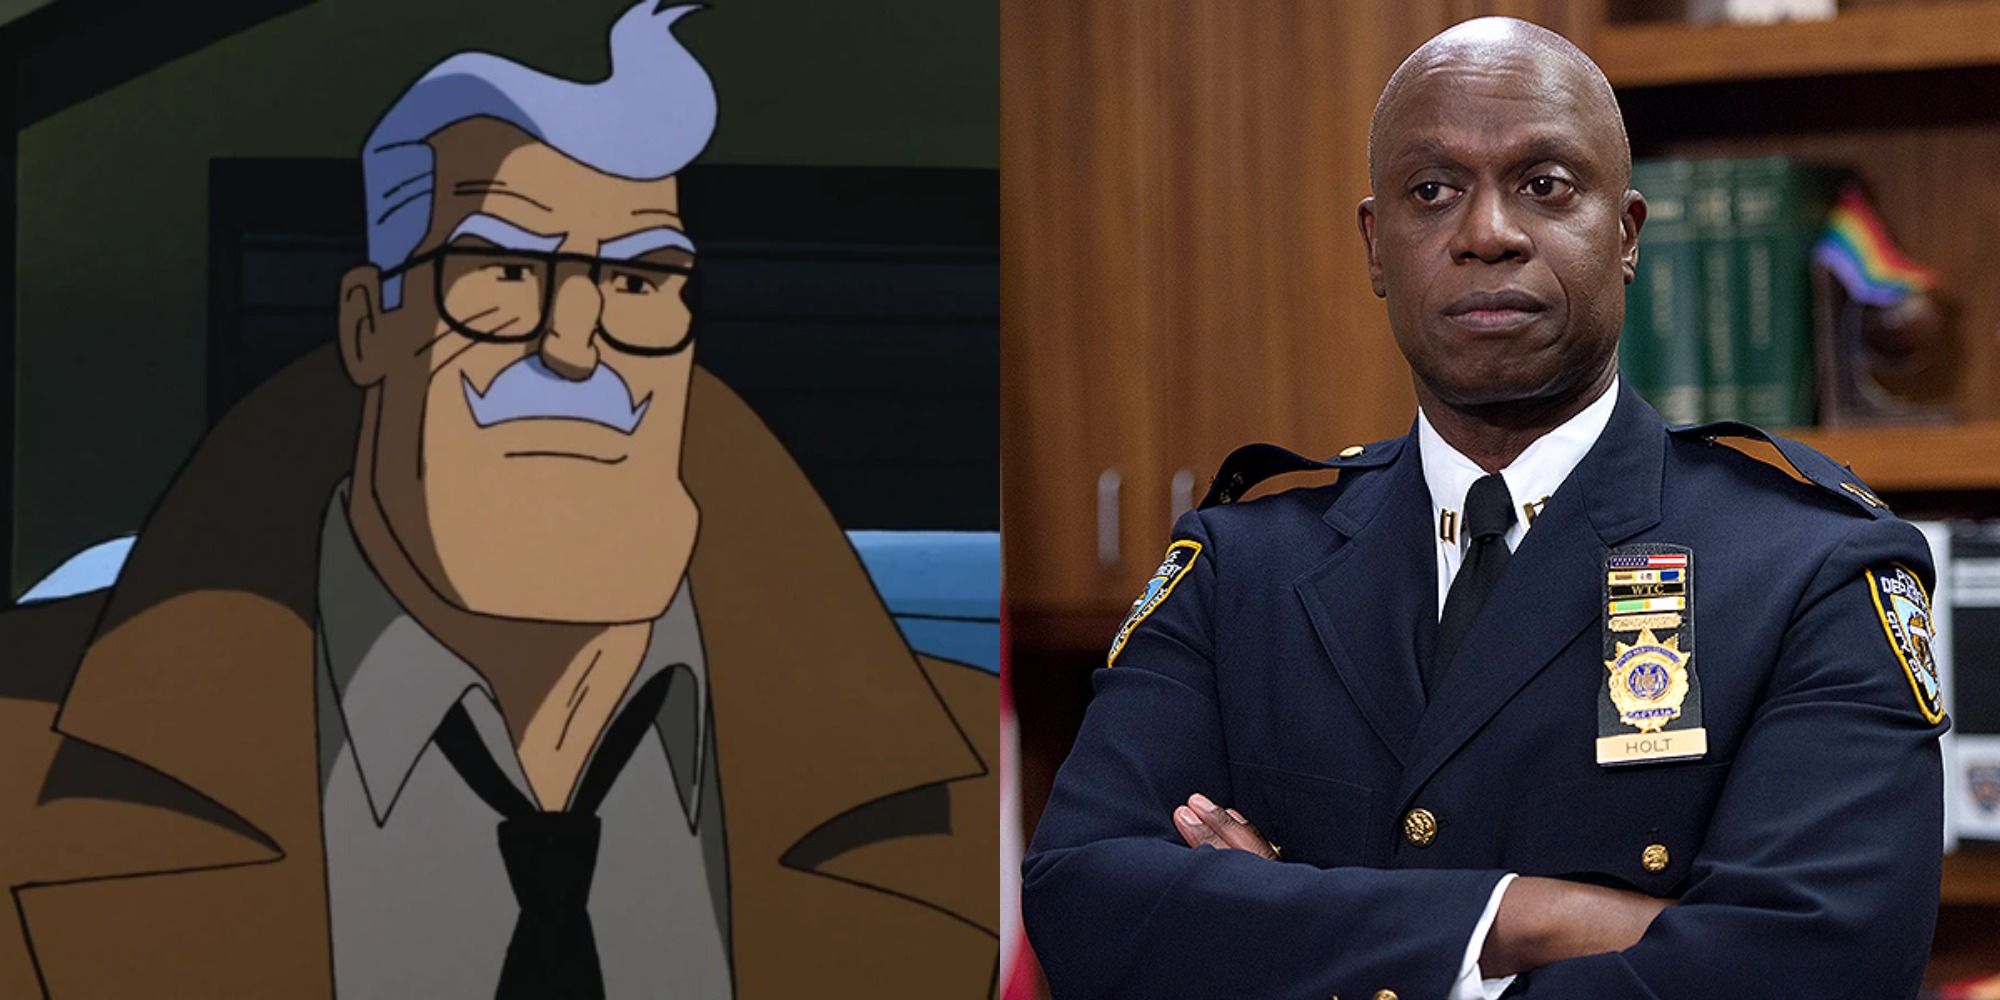 Split image of Jim Gordon in Batman: The Animated Series and Andre Braugher in Brooklyn 99